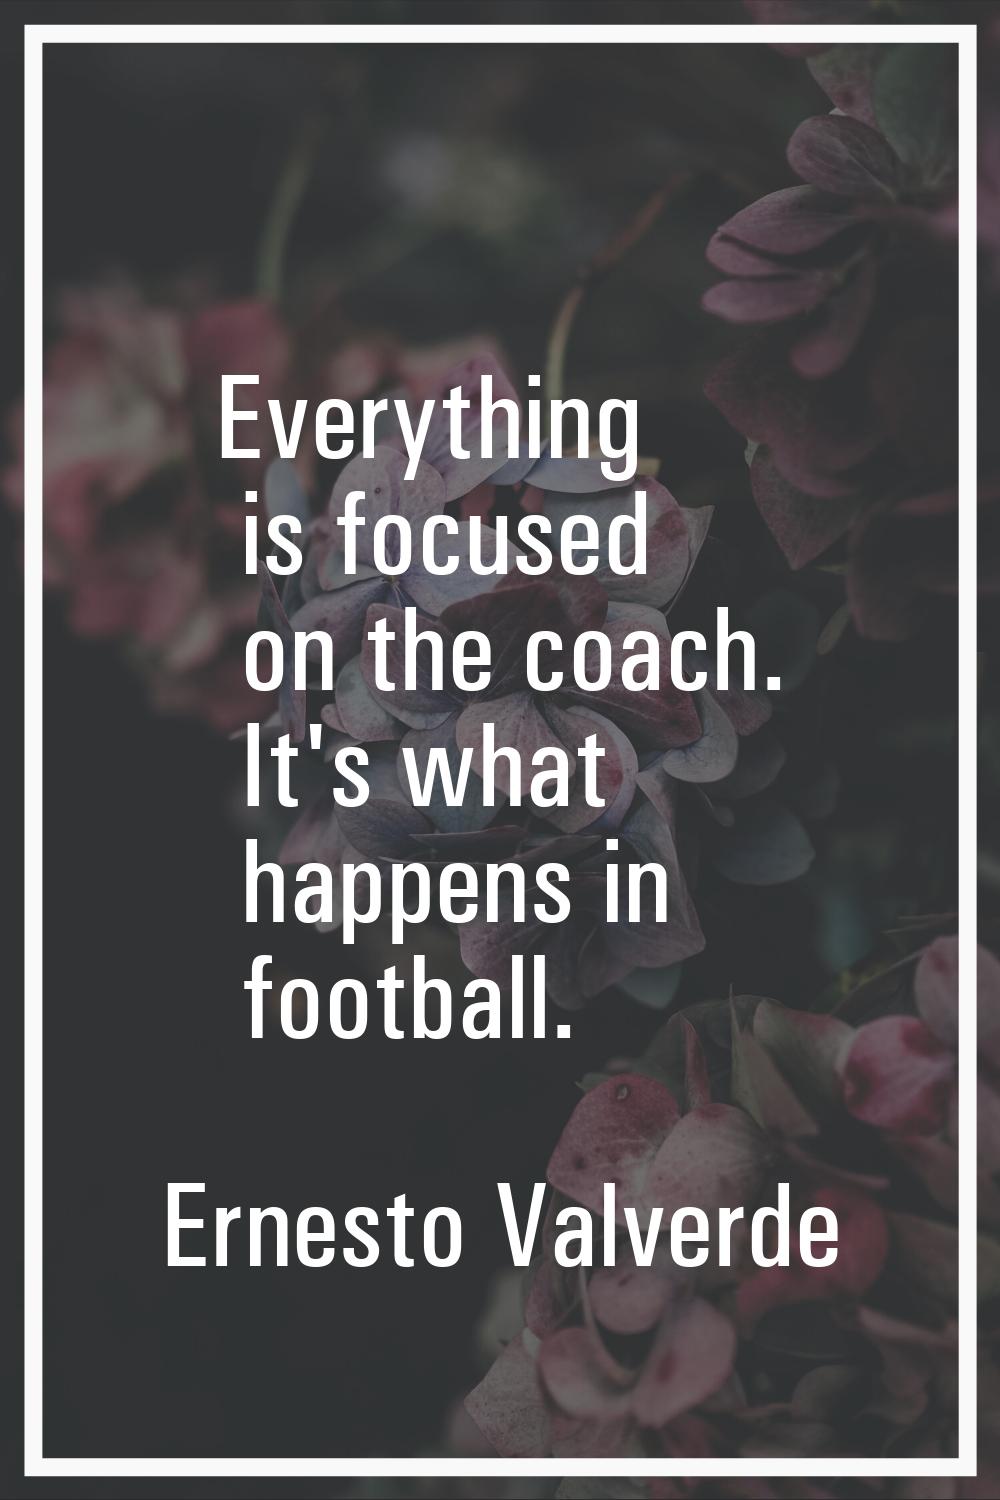 Everything is focused on the coach. It's what happens in football.